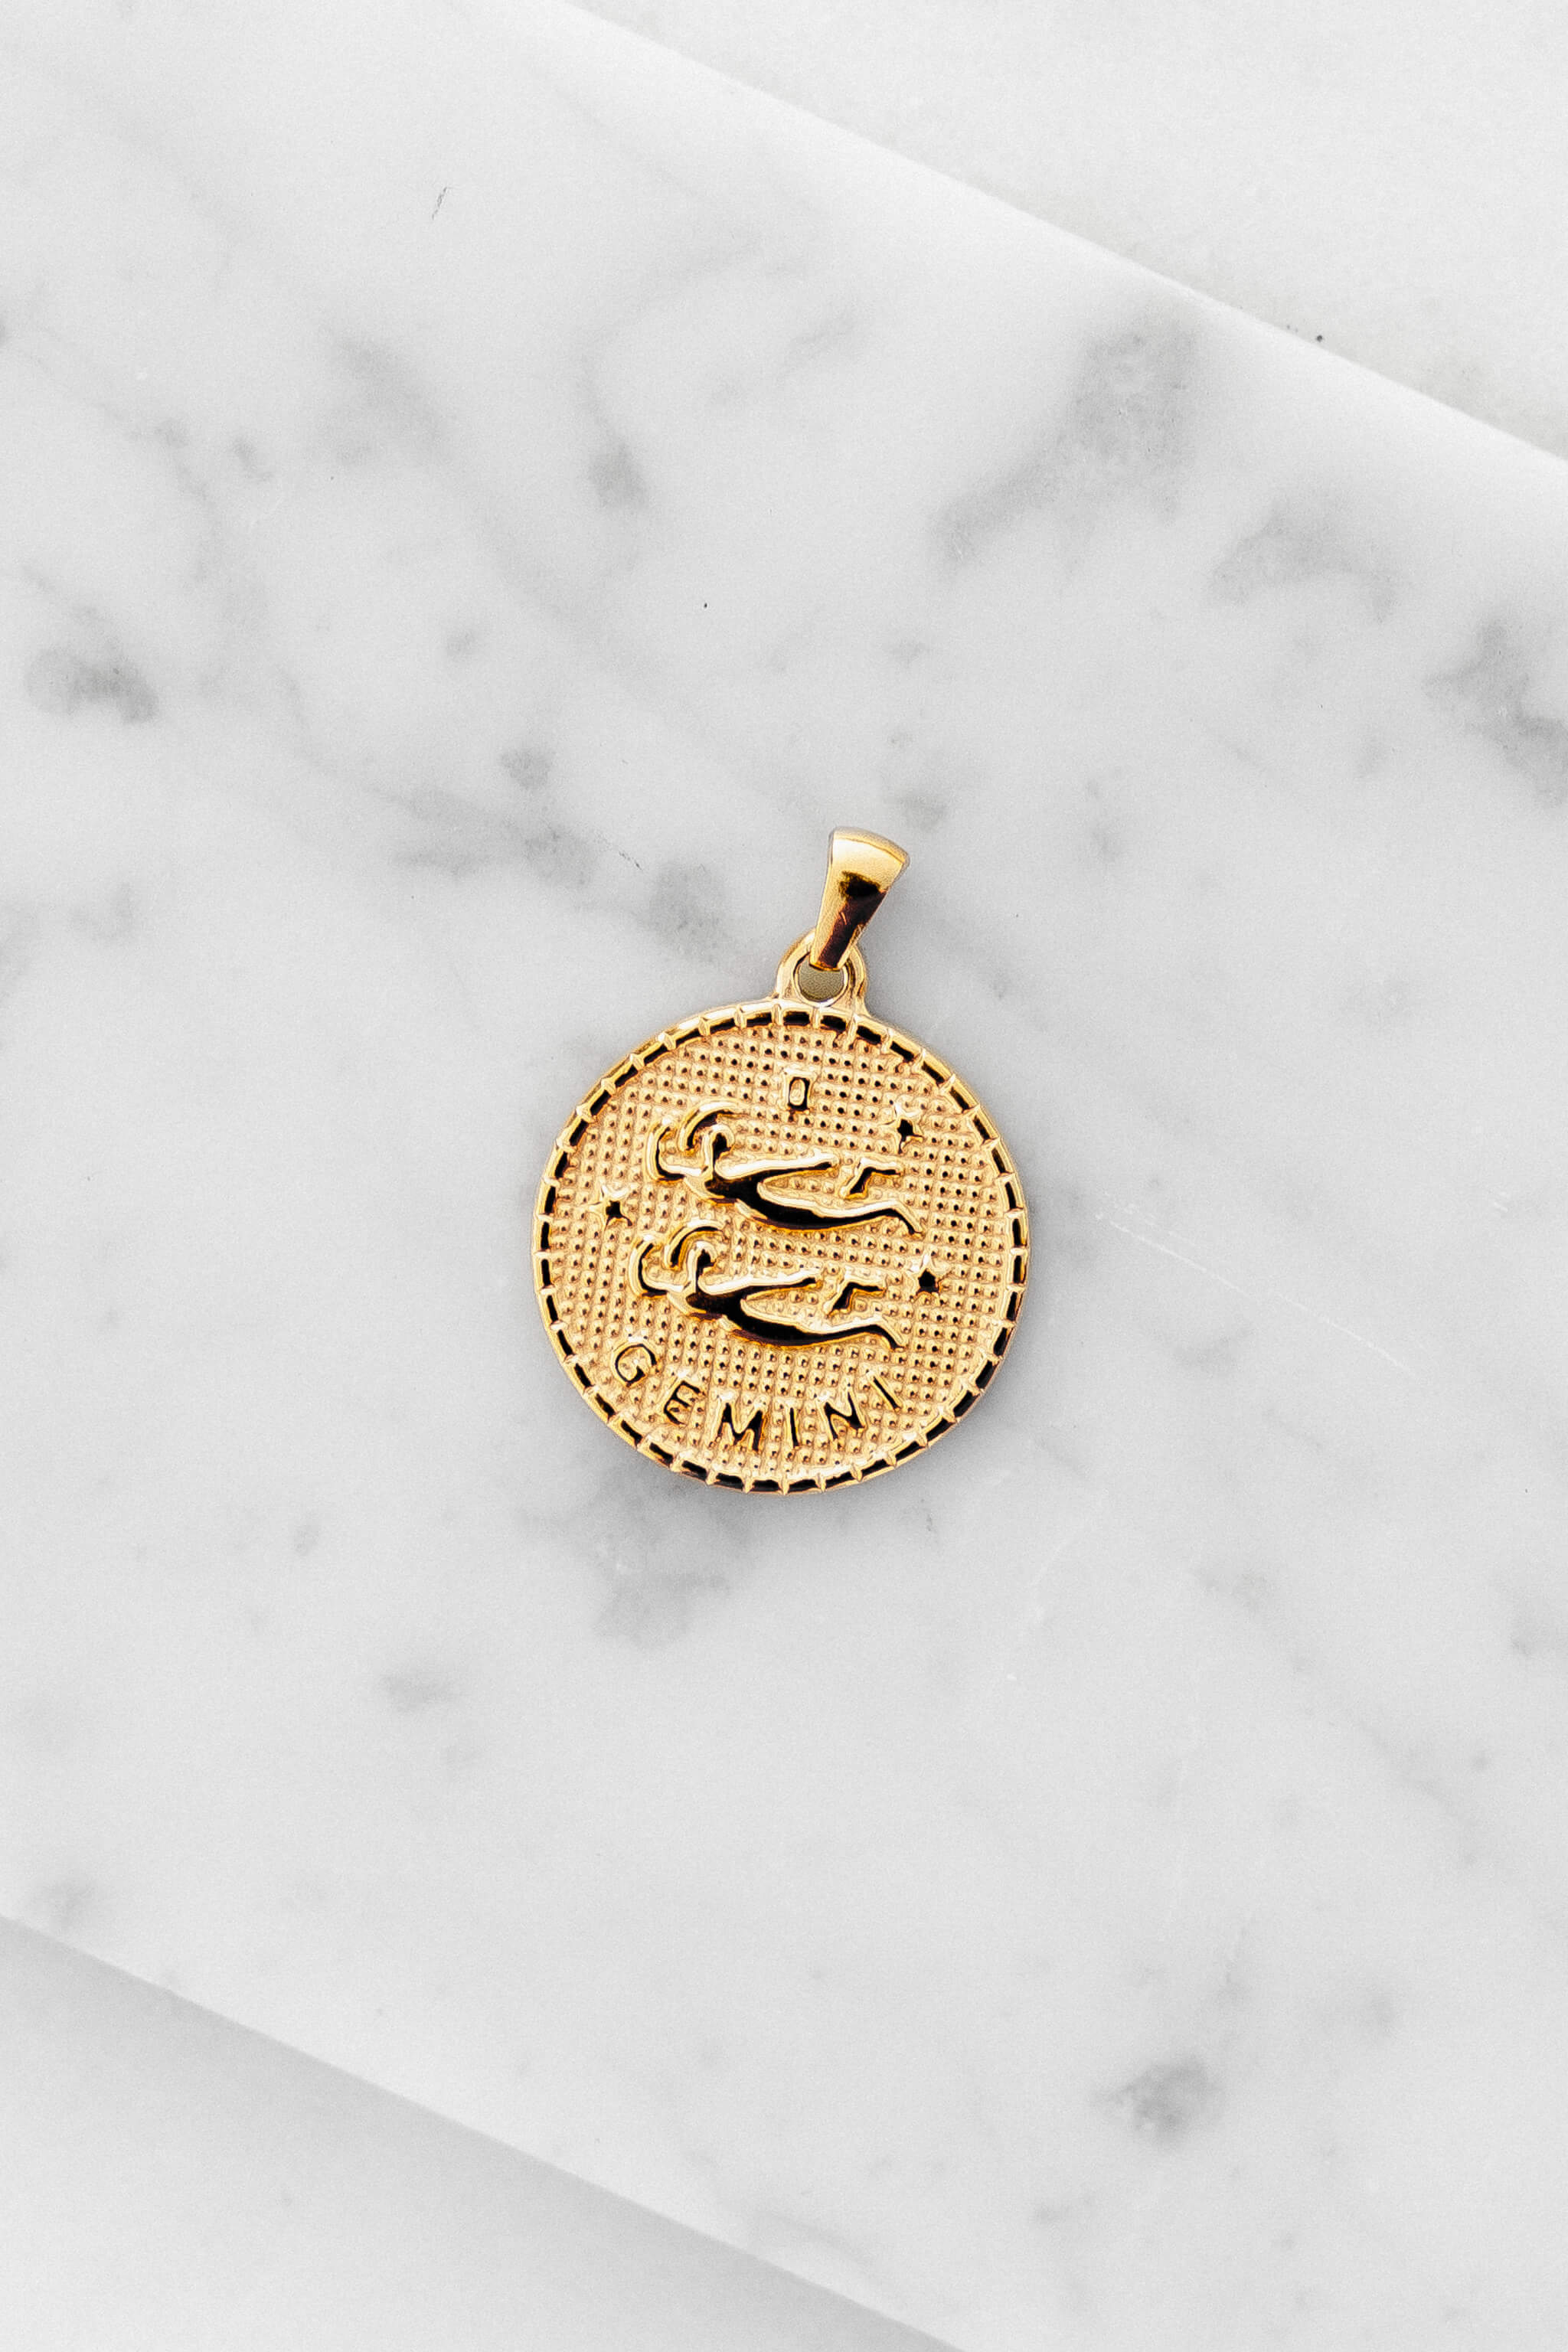 Gemini zodiac sign gold coin charm laying on a white marble